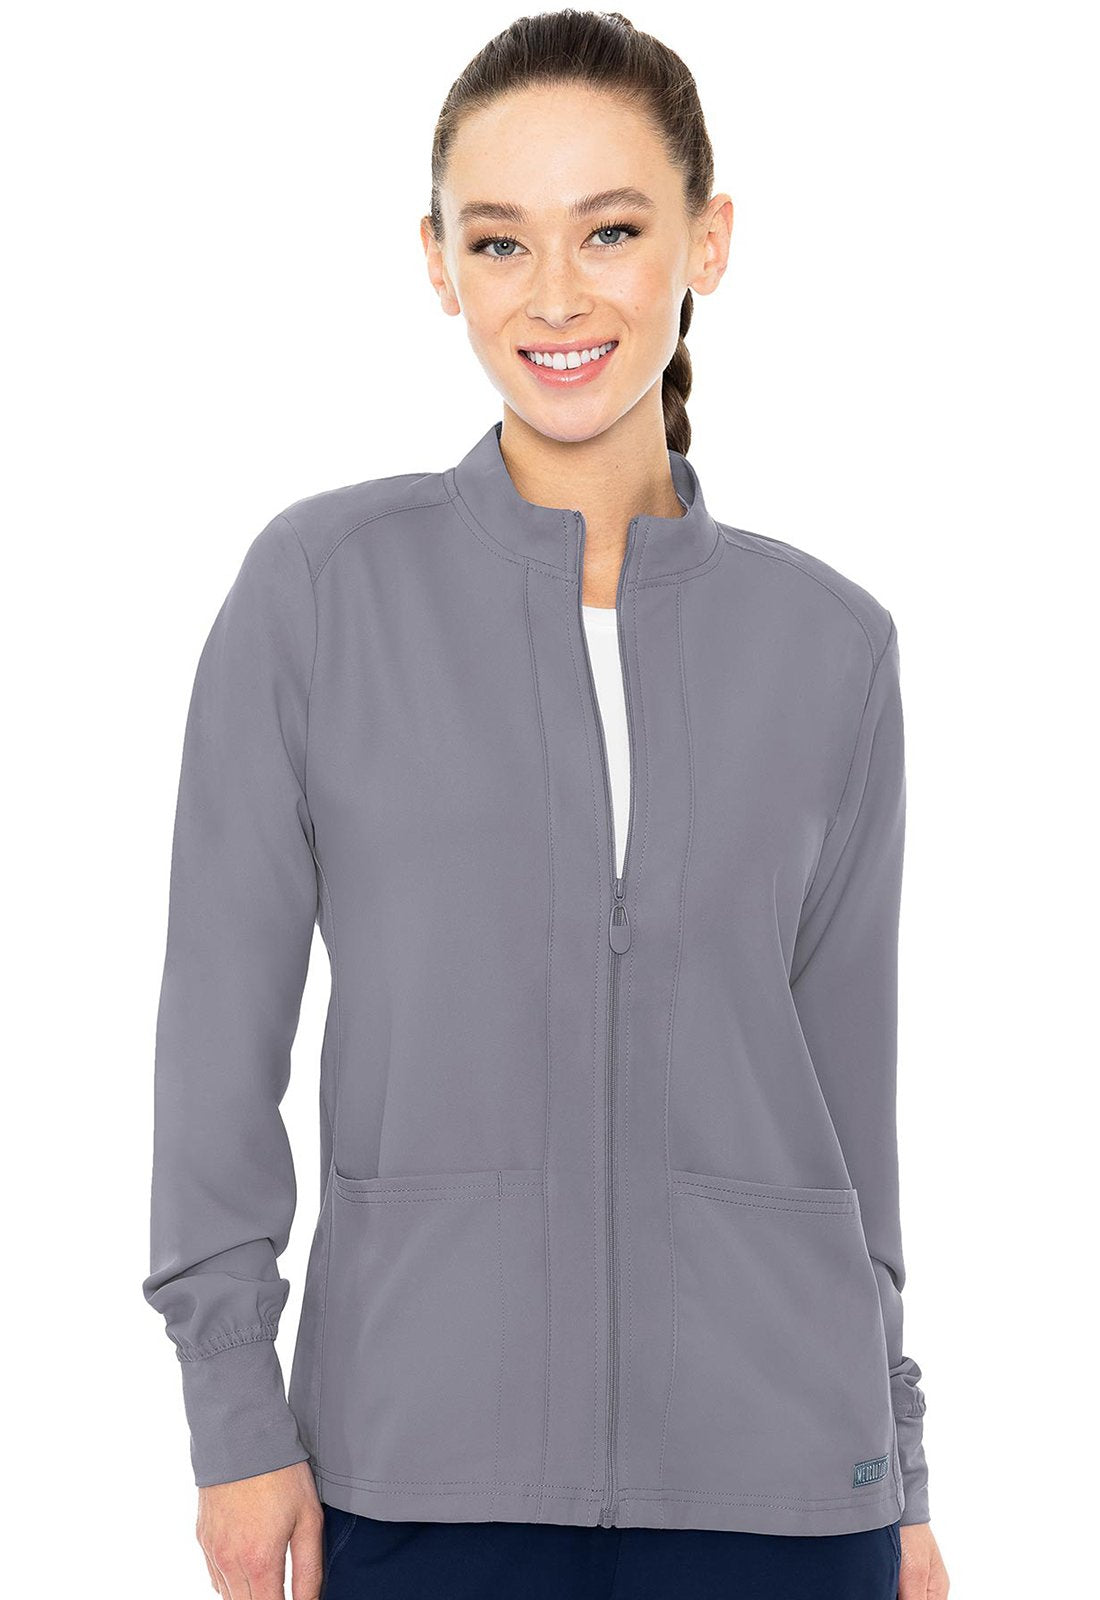 Med Couture MC Insight Cloud / 3XL MC Insight  Zip Front Warm-Up With Shoulder Yokes MC2660